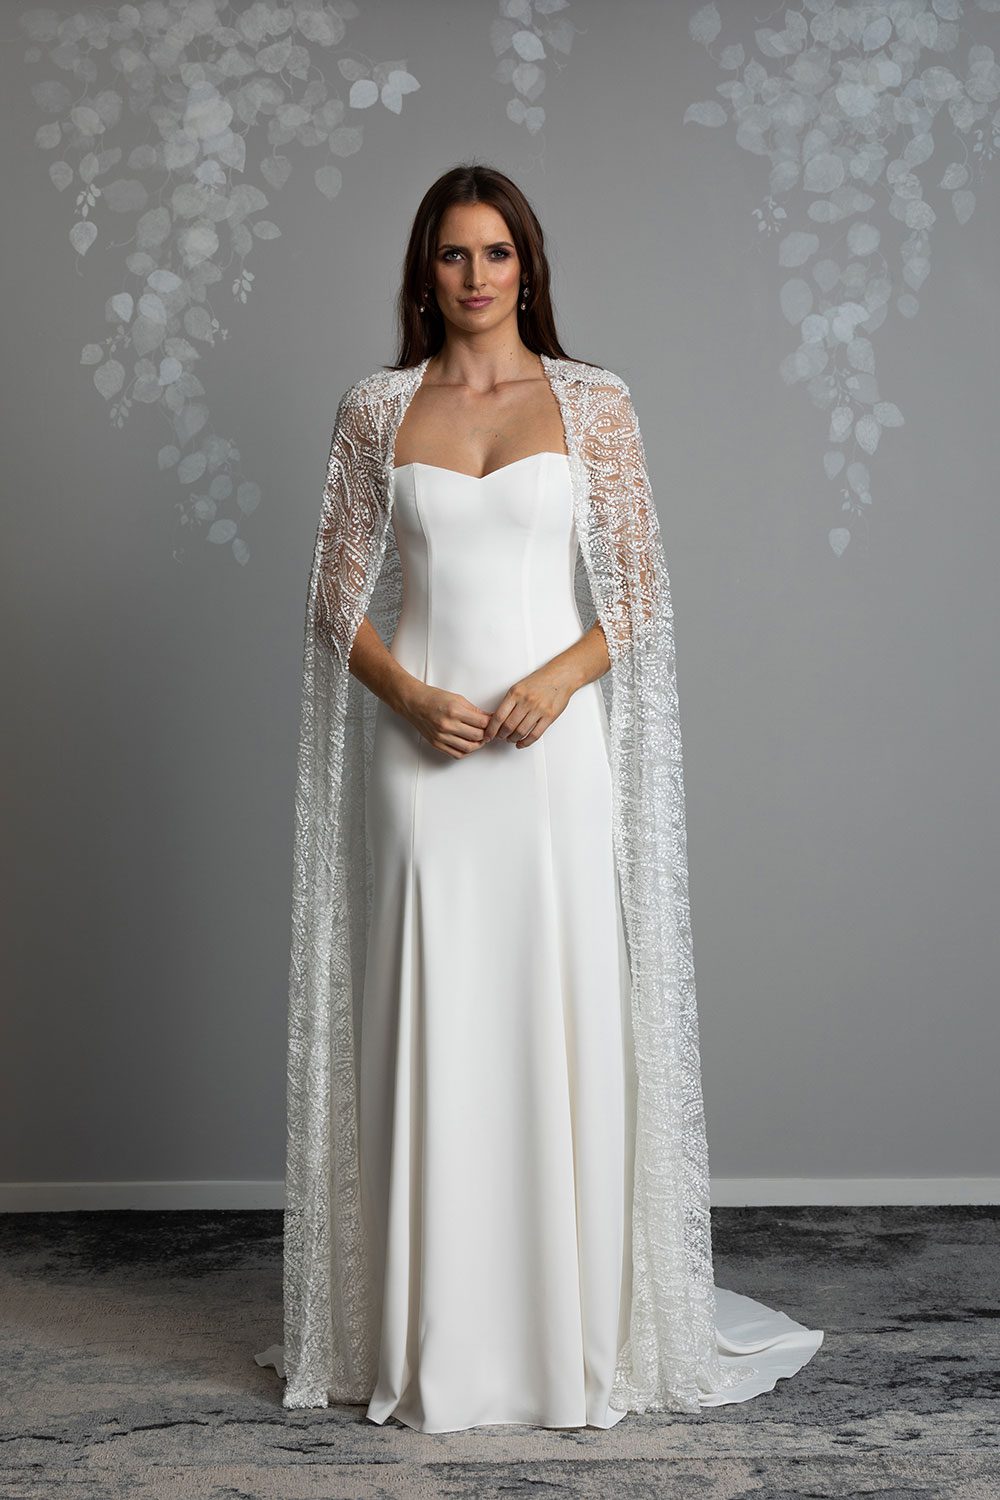 Lourde wedding Dress by Vinka Design - A dazzling display of beaded lace draped artfully from the shoulder, our Lourde gown is the epitome of timeless bridal elegance. Lourde’s cape features accentuated shoulders and opulent, iridescent beading. Crafted with functionality in mind, the richly beaded cape is detachable and reveals a panel cut gown with a fit-and-flare silhouette made in luxurious bridal crepe that falls flawlessly into a flared train. Full length view of model wearing sweetheart neckline gown with thin straps made of bridal crepe with a beaded cape and flared train